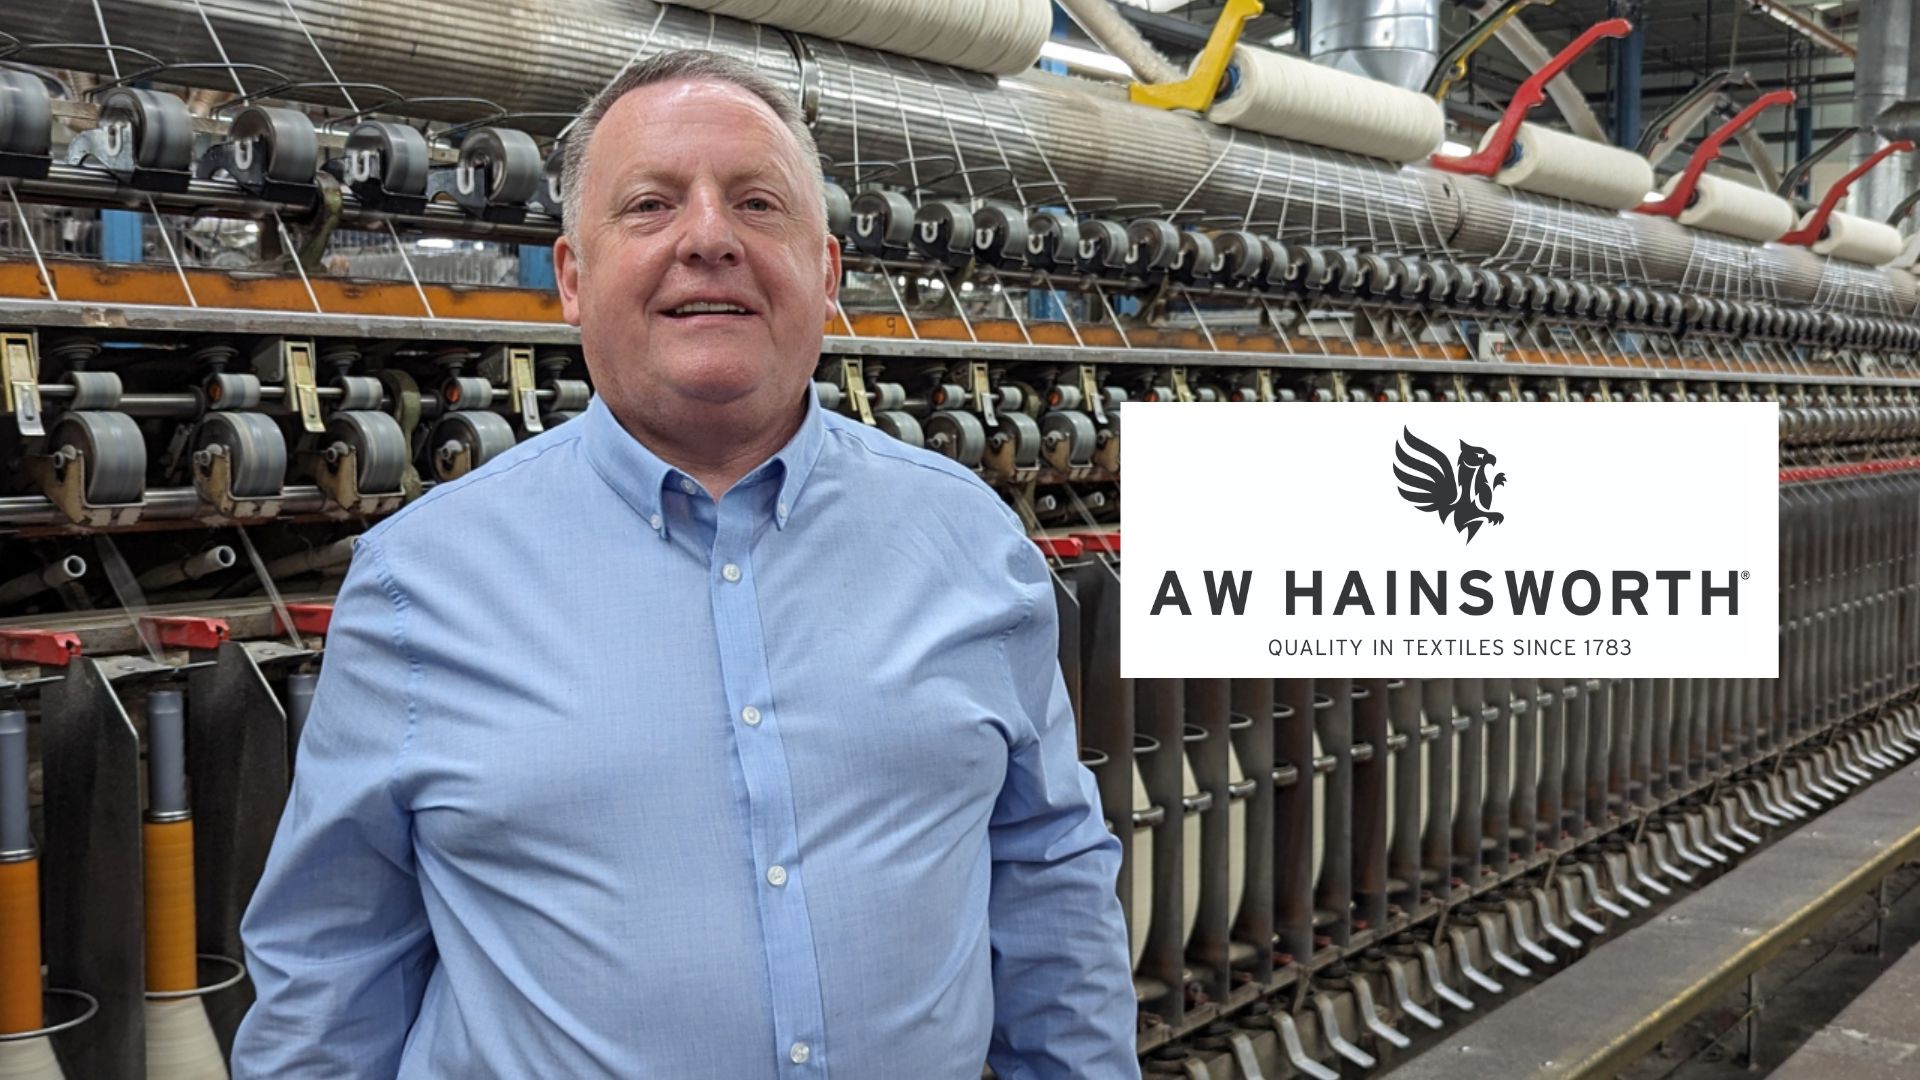 Paul Dudley Appointed as Head of Engineering and Sustainability at AW Hainsworth